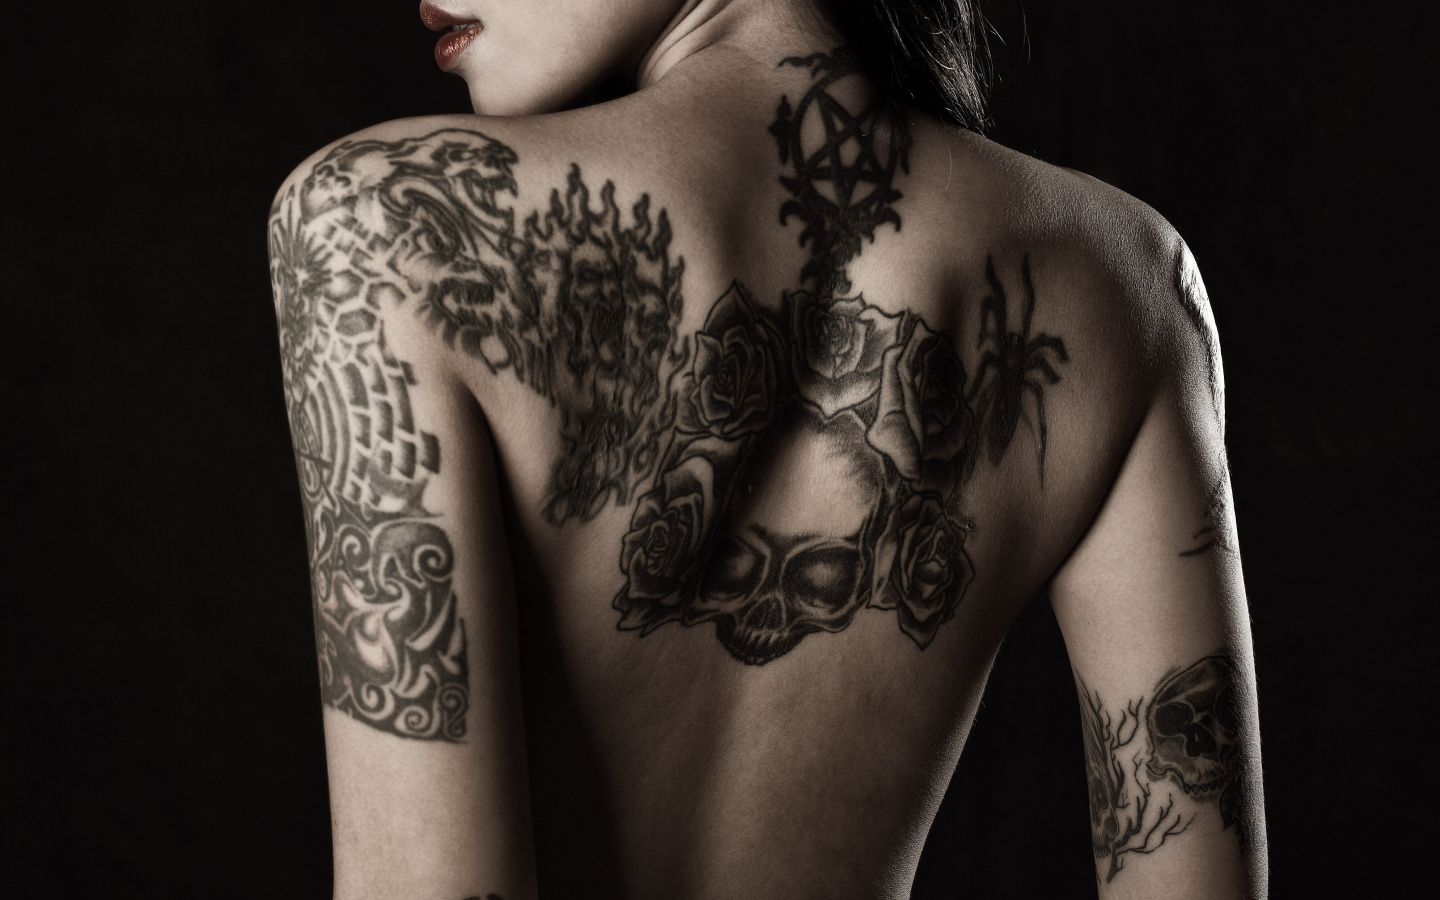 Girl with tattoos on her arms and back